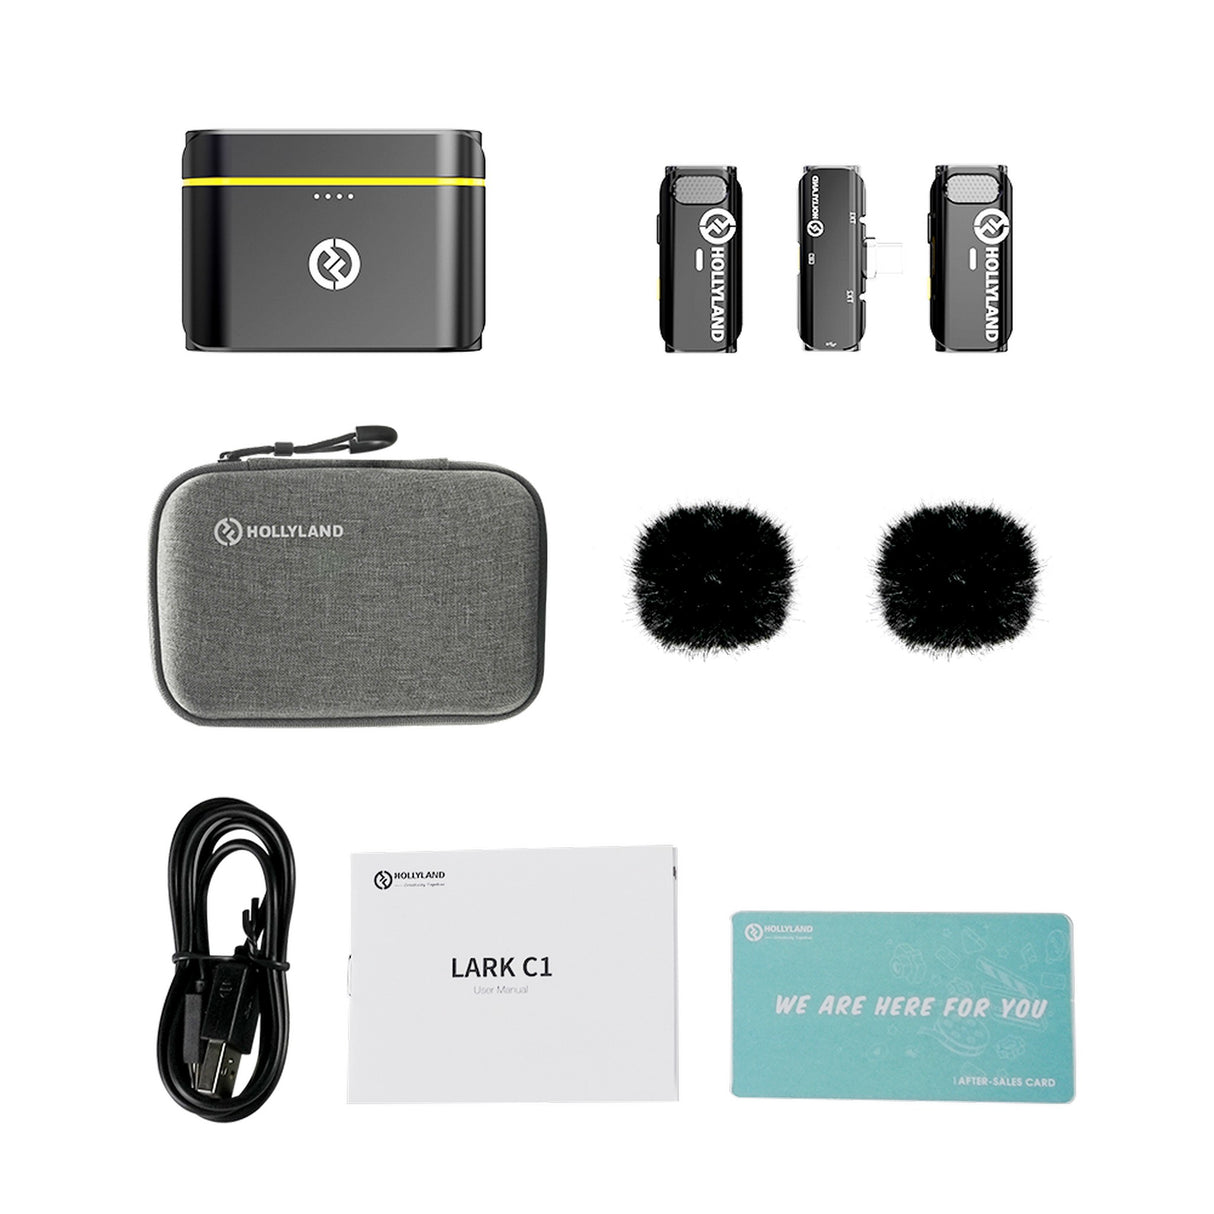 Hollyland Lark C1 Duo Wireless Lavalier Microphone for Android, Cool Black